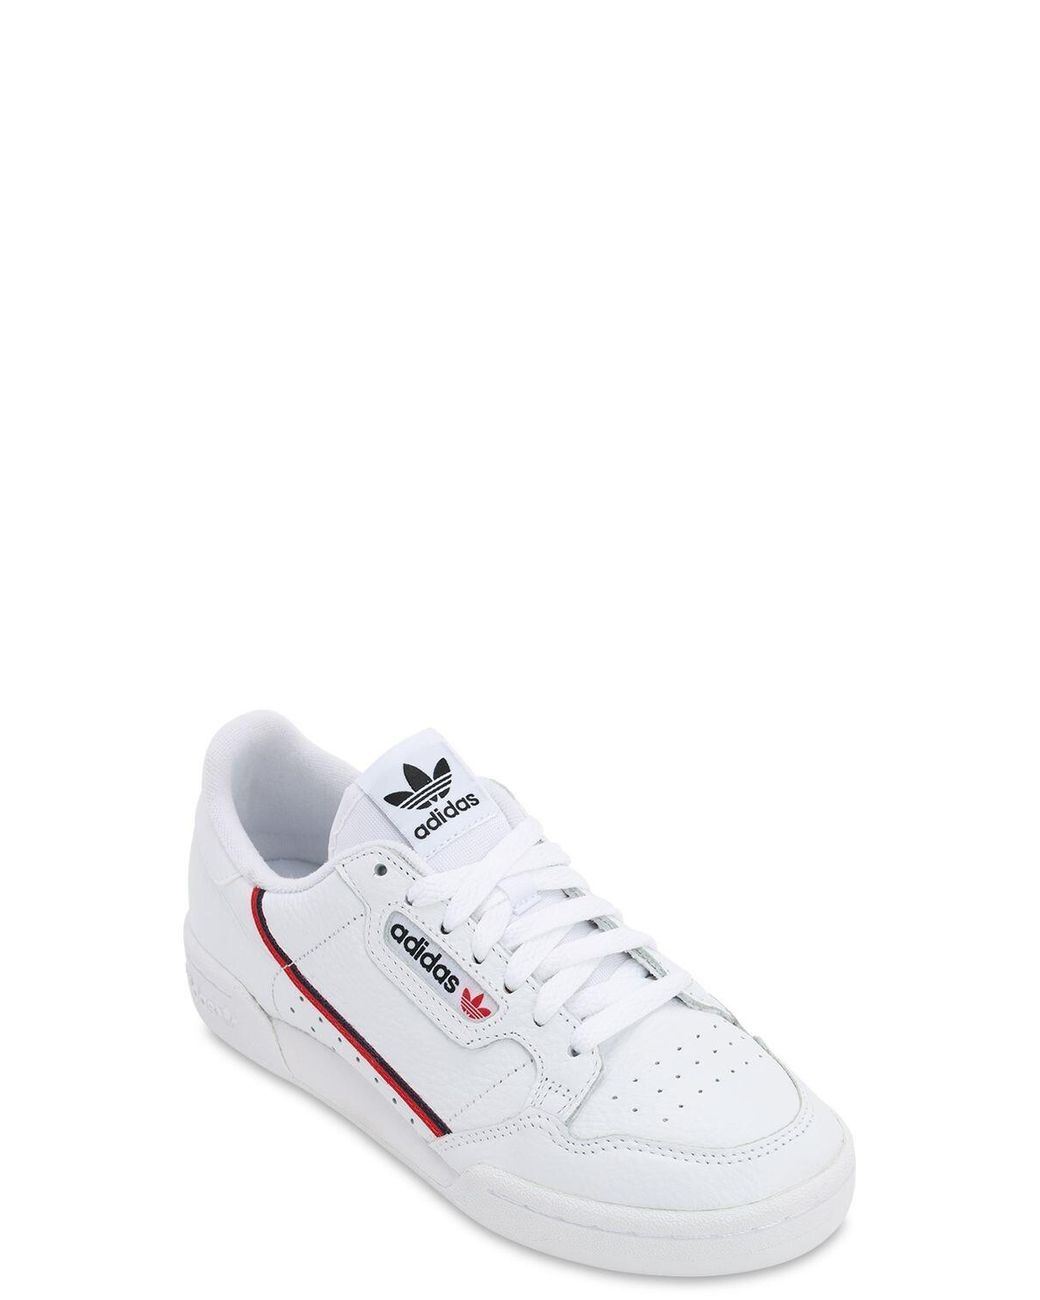 adidas Originals Rubber Continental 80 Trainers in White/Green (White) for  Men - Save 29% | Lyst